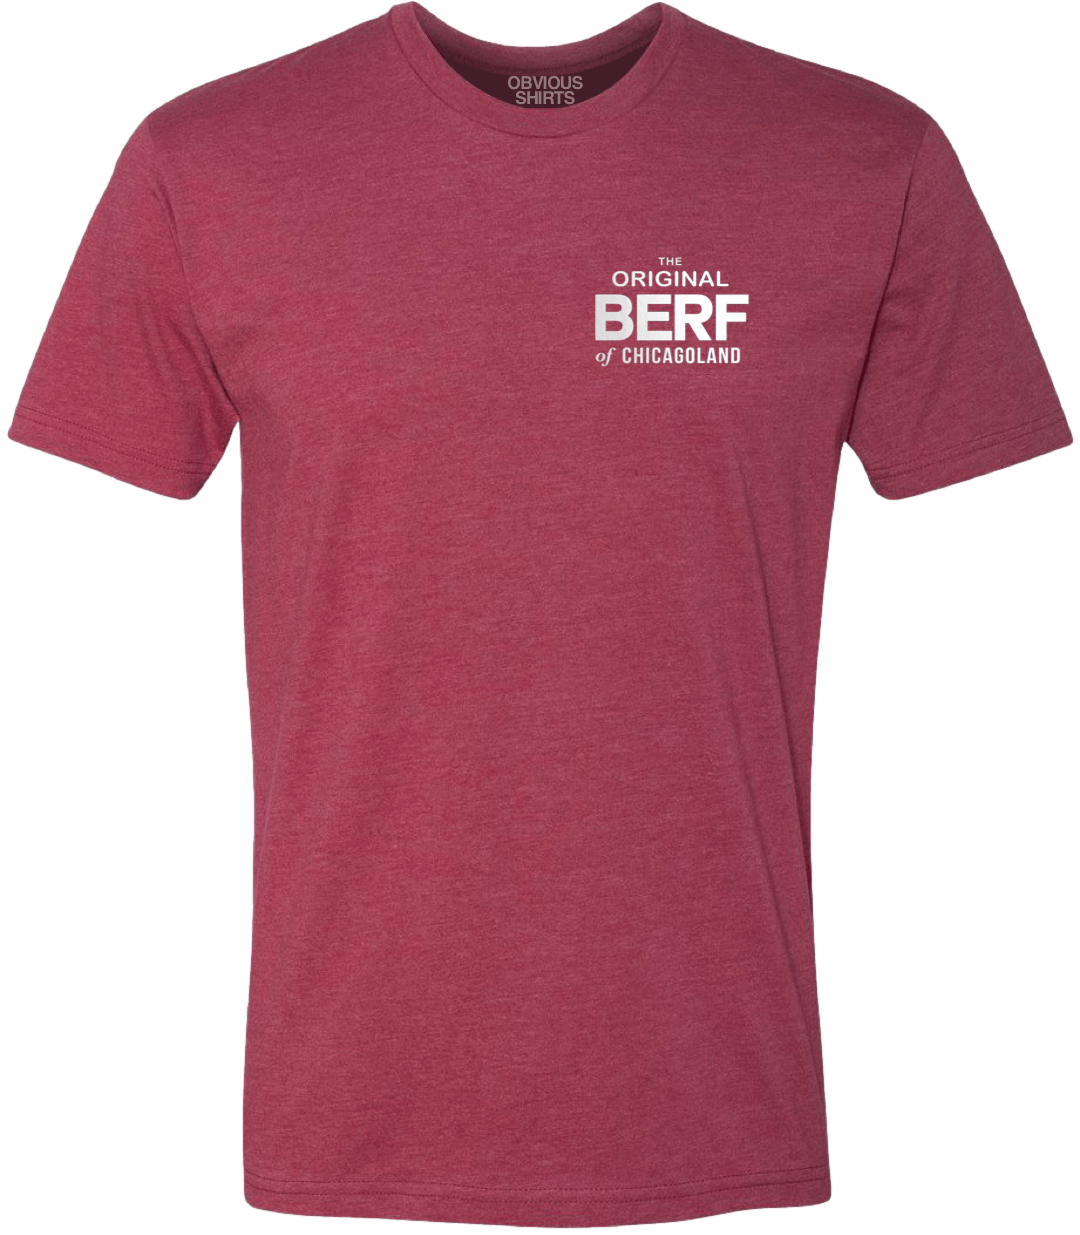 THE ORIGINAL BERF OF CHICAGOLAND. - OBVIOUS SHIRTS